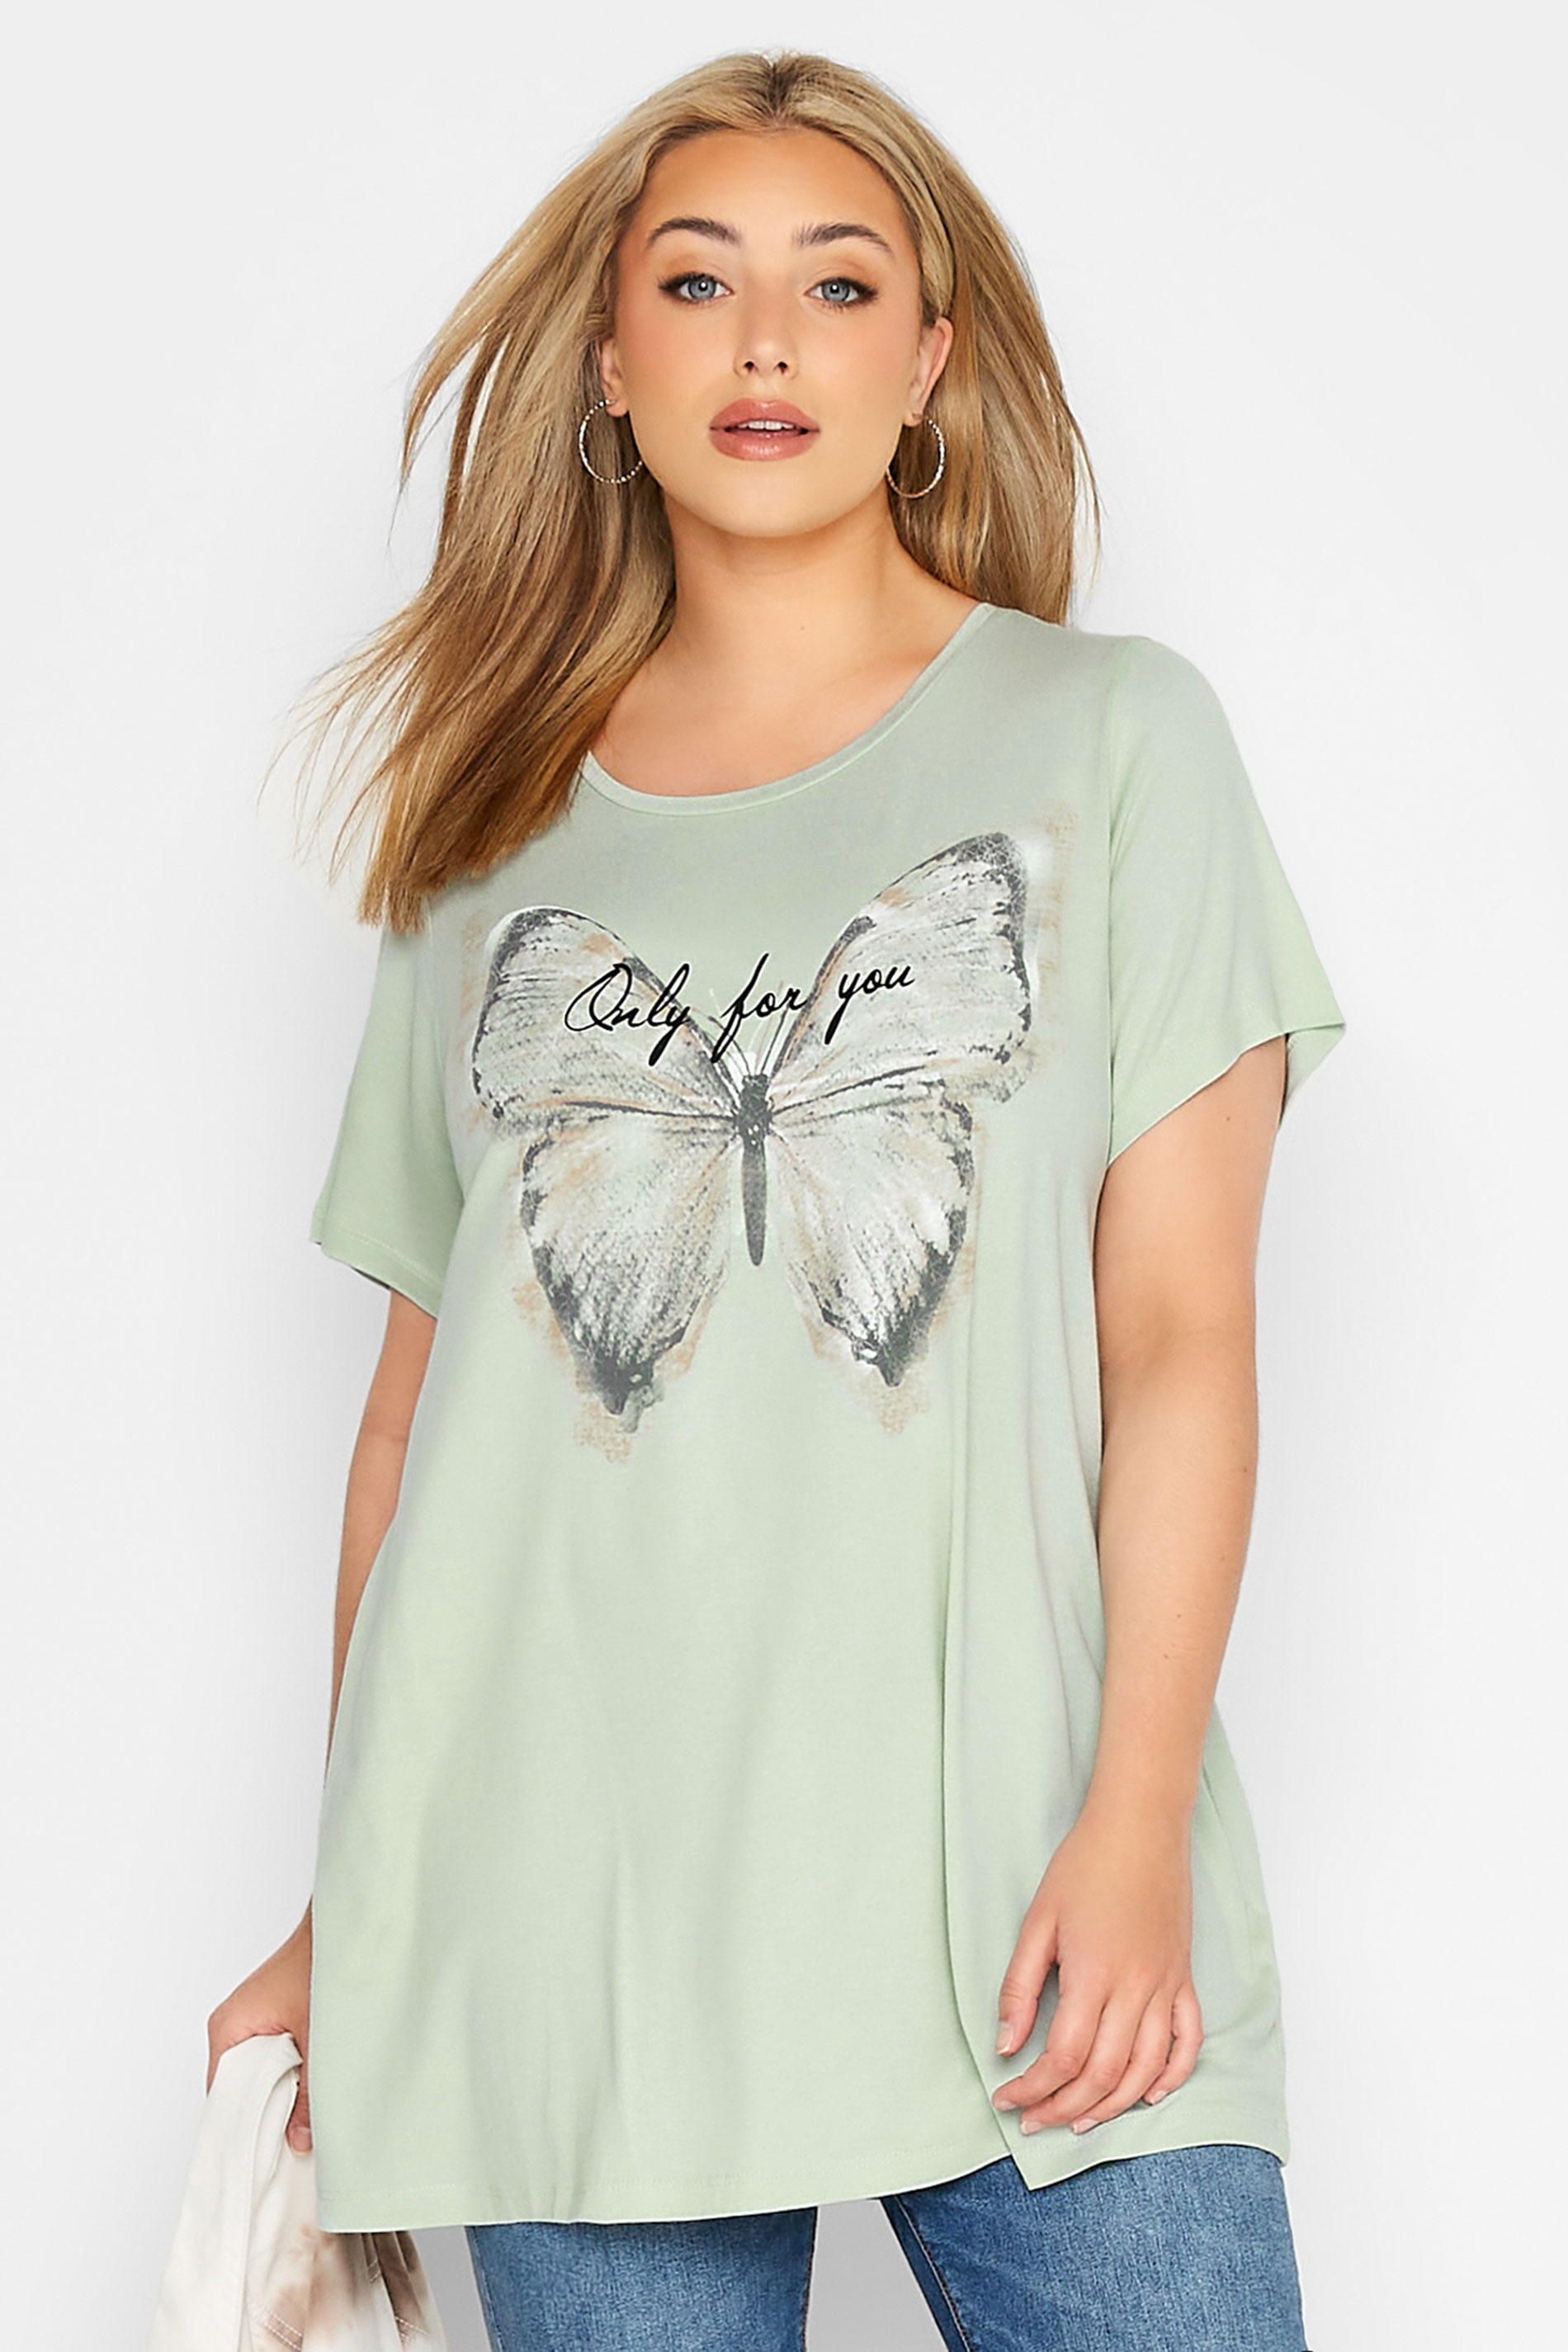 Grande taille  Tops Grande taille  Tops à Slogans | T-Shirt Vert Menthe Papillon 'Only For You' - NH68863